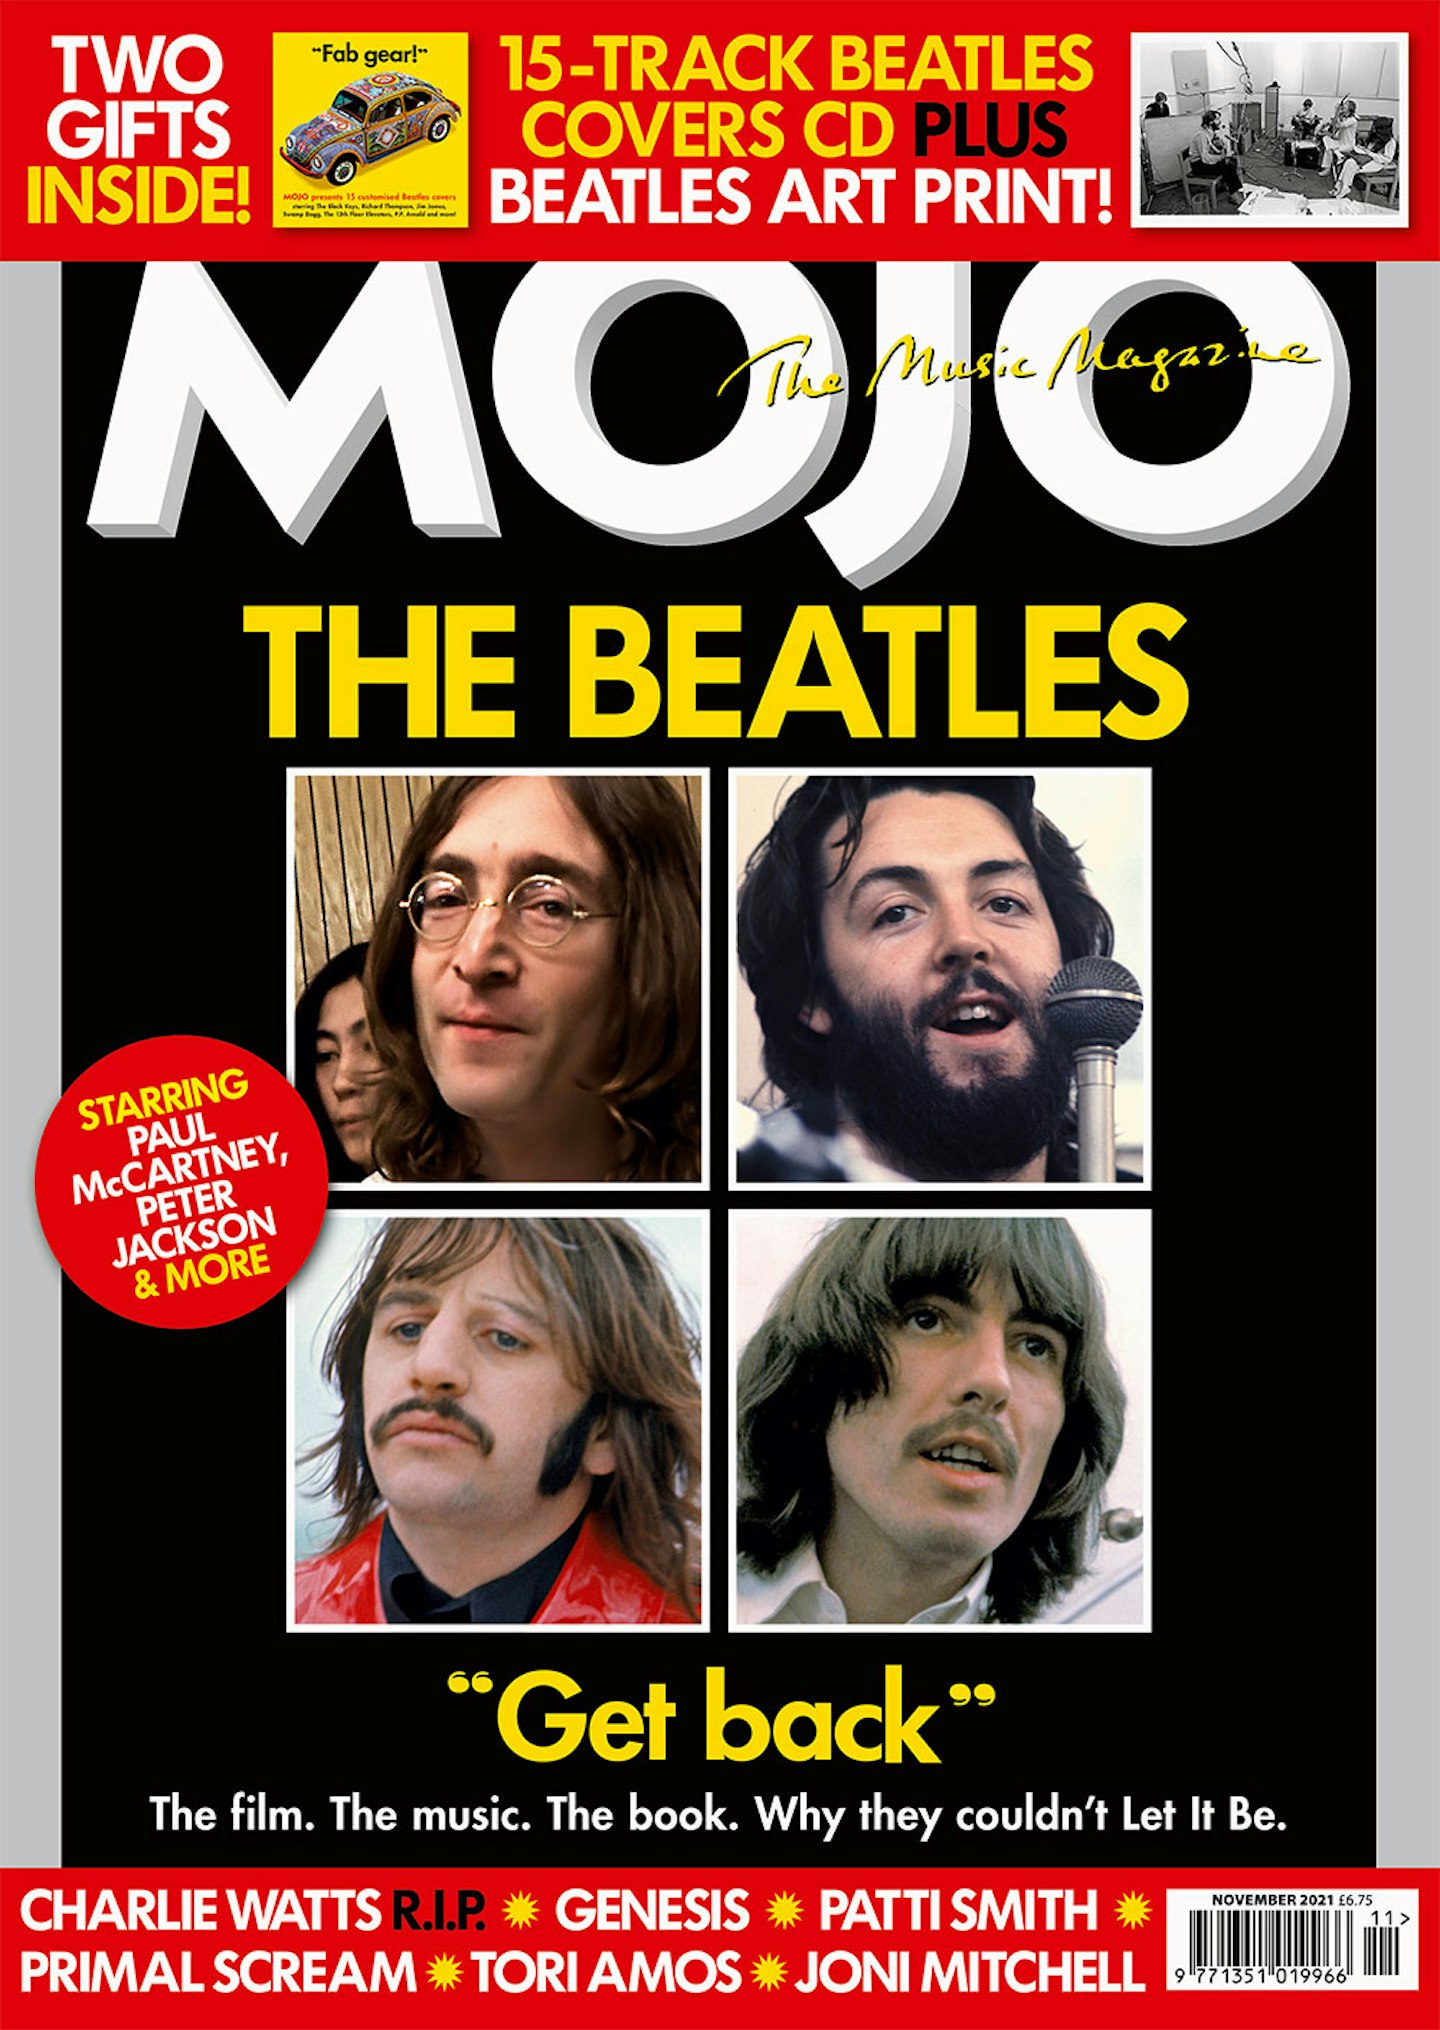 MOJO 336, starring the Beatles, as it appears on newsstands.